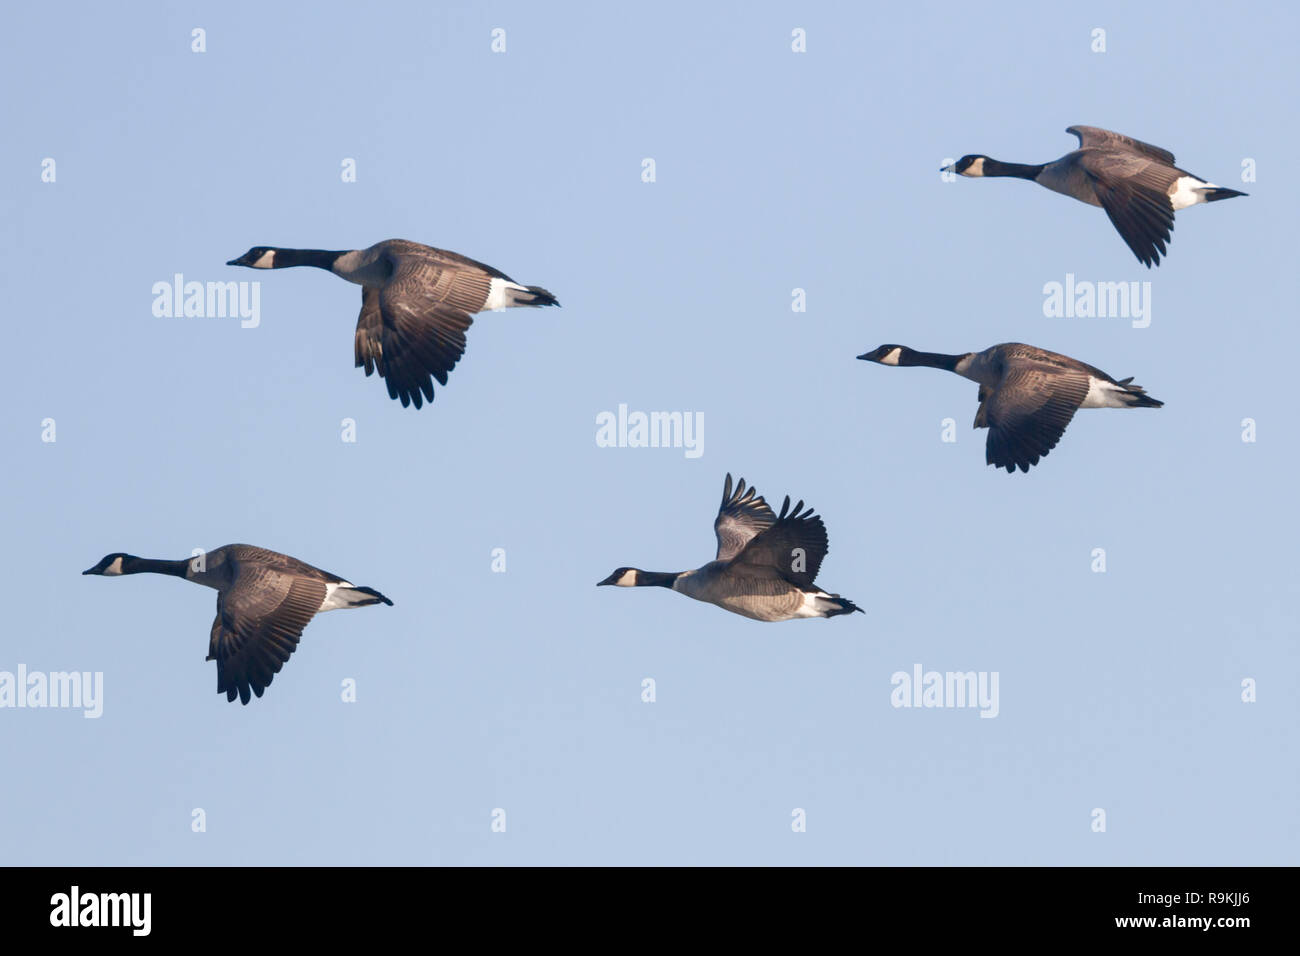 Side view of 5 Canada geese flying together against a clear, light blue sky, showing wings, on fall day in Alberta, Canada Stock Photo